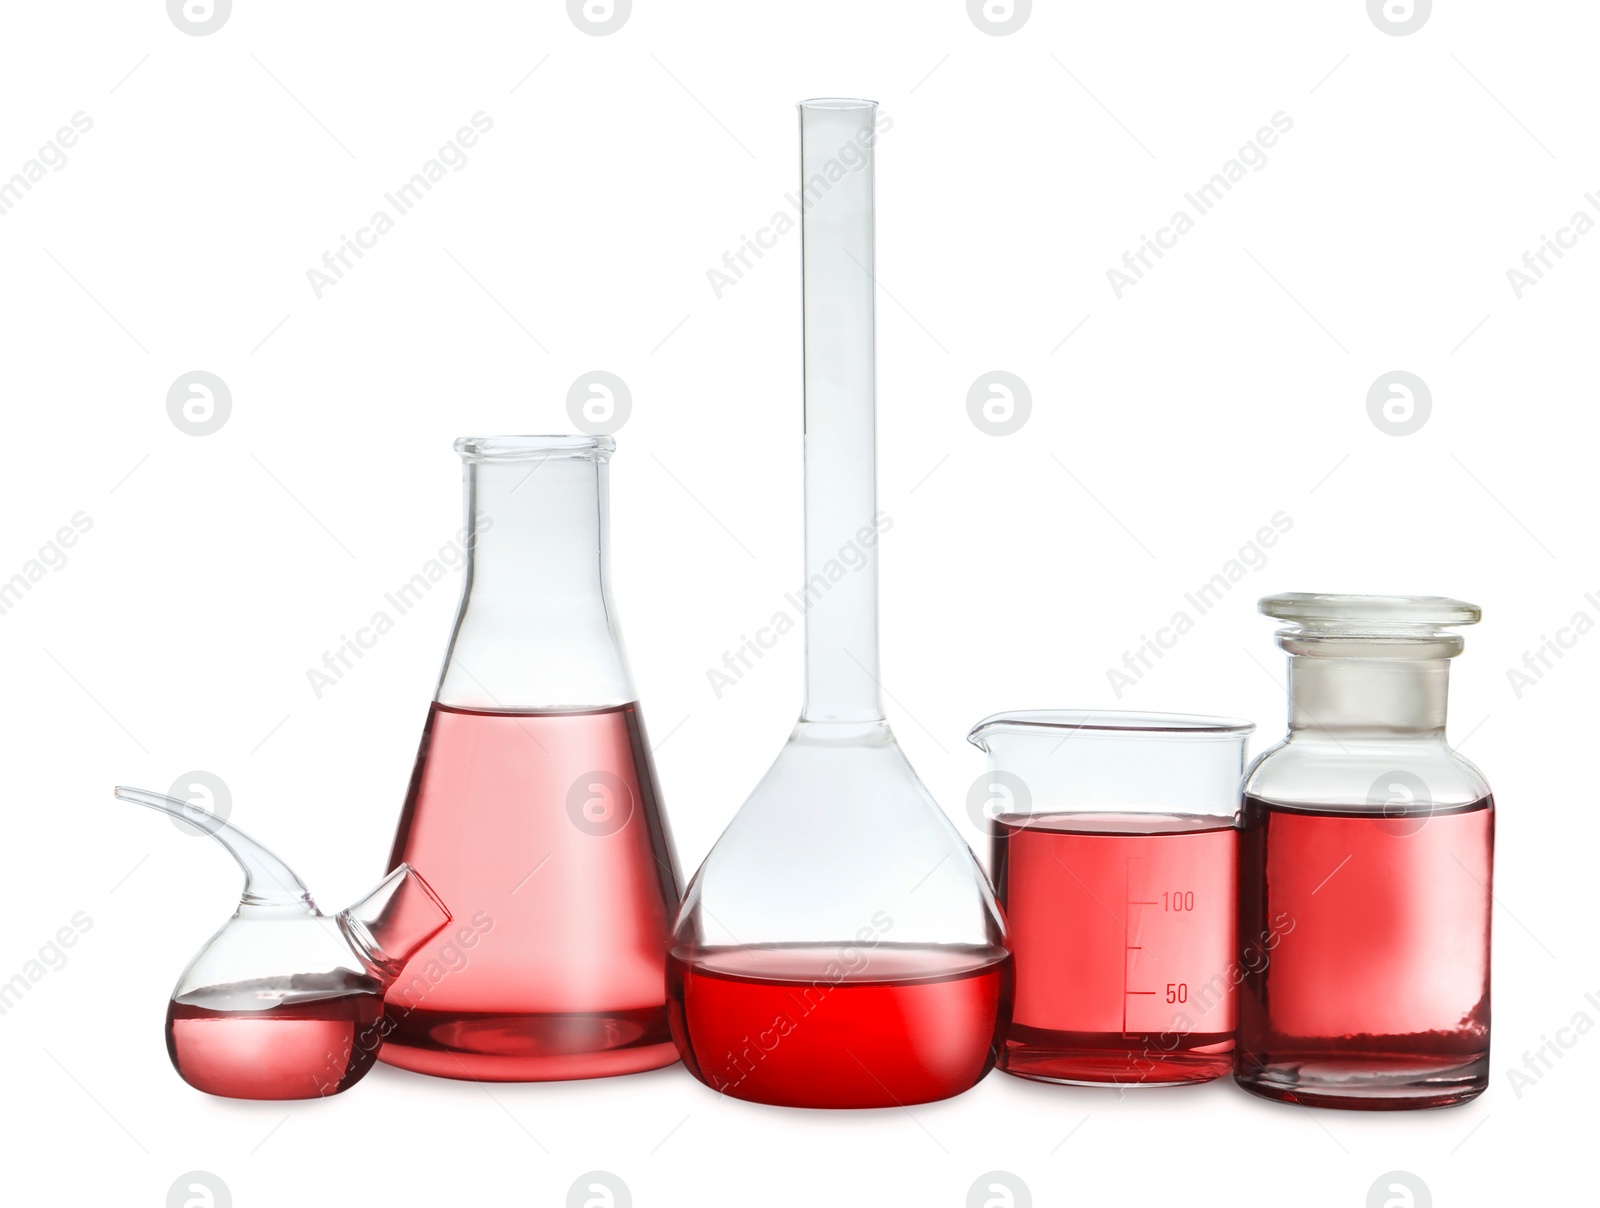 Image of Laboratory glassware with red liquid isolated on white